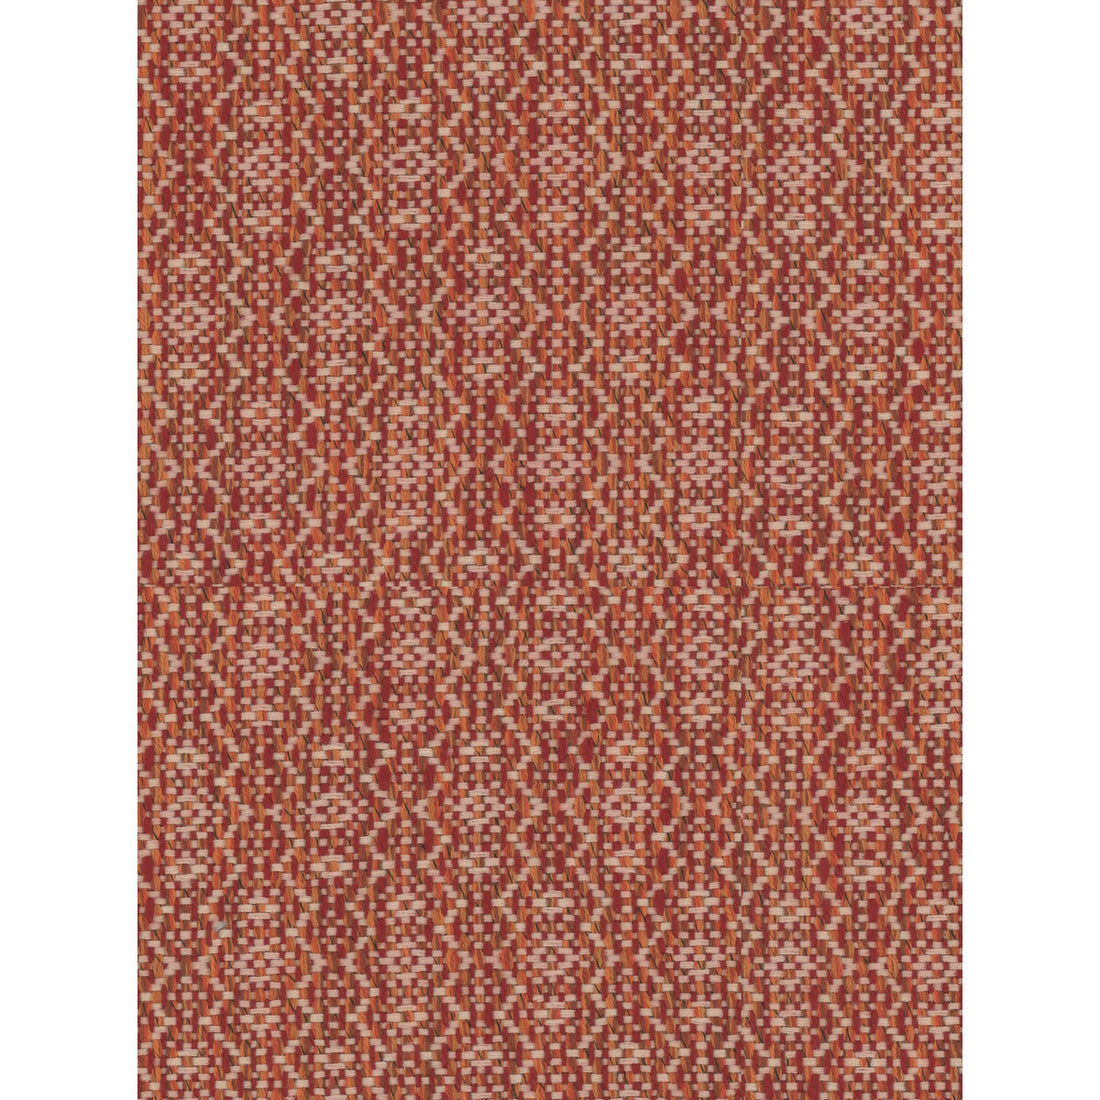 Kravet Contract fabric in 34630-912 color - pattern 34630.912.0 - by Kravet Contract in the Crypton Incase collection